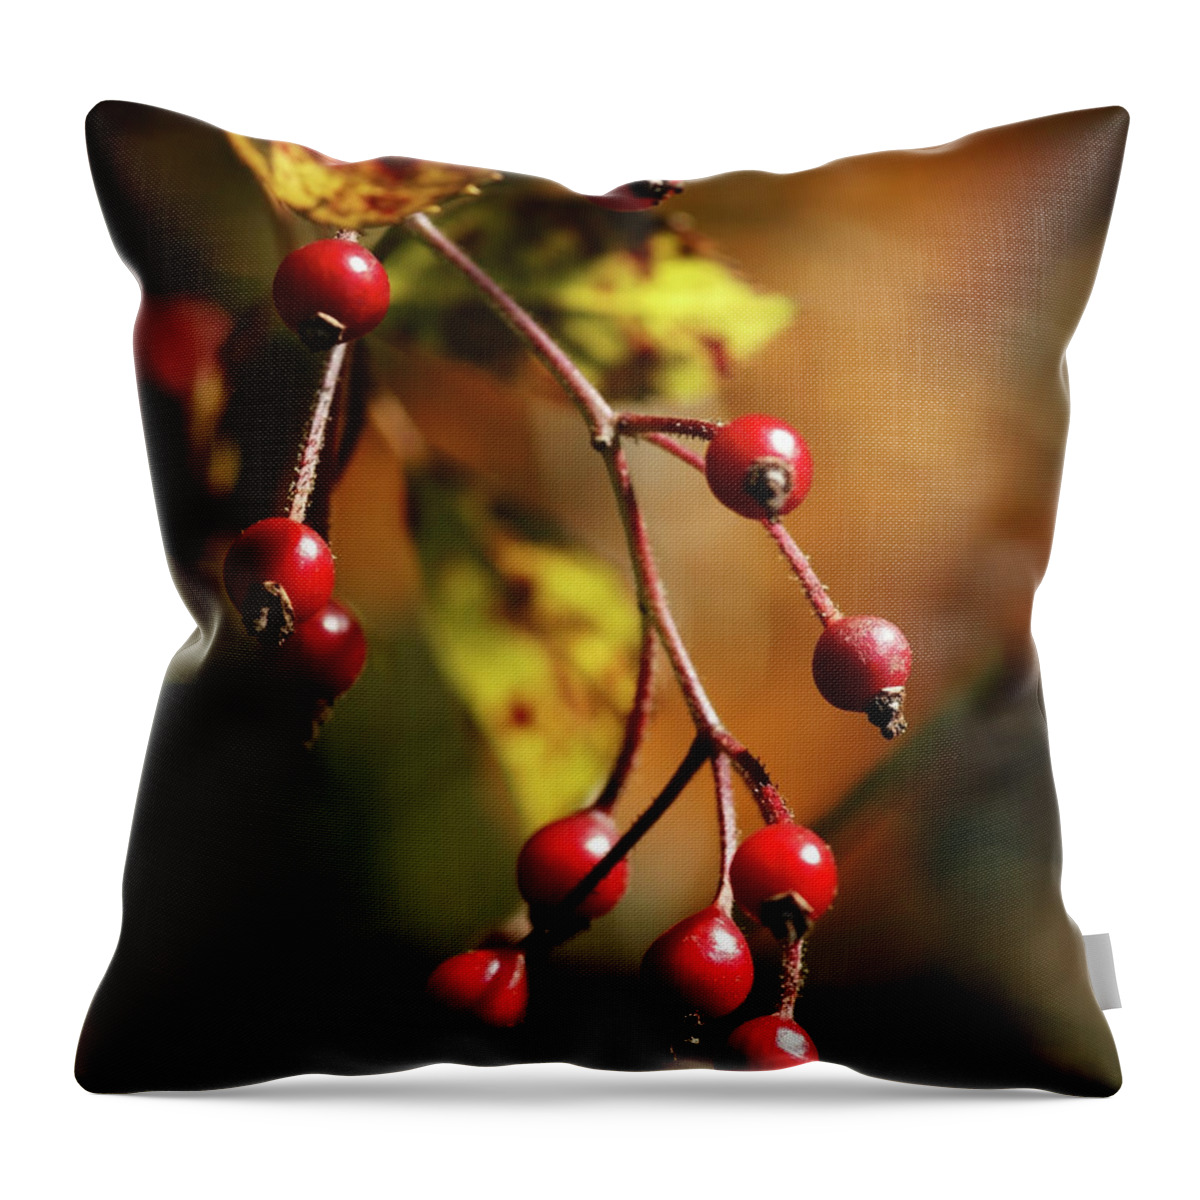 Berries Throw Pillow featuring the photograph Autumn Berries by Linda Shafer